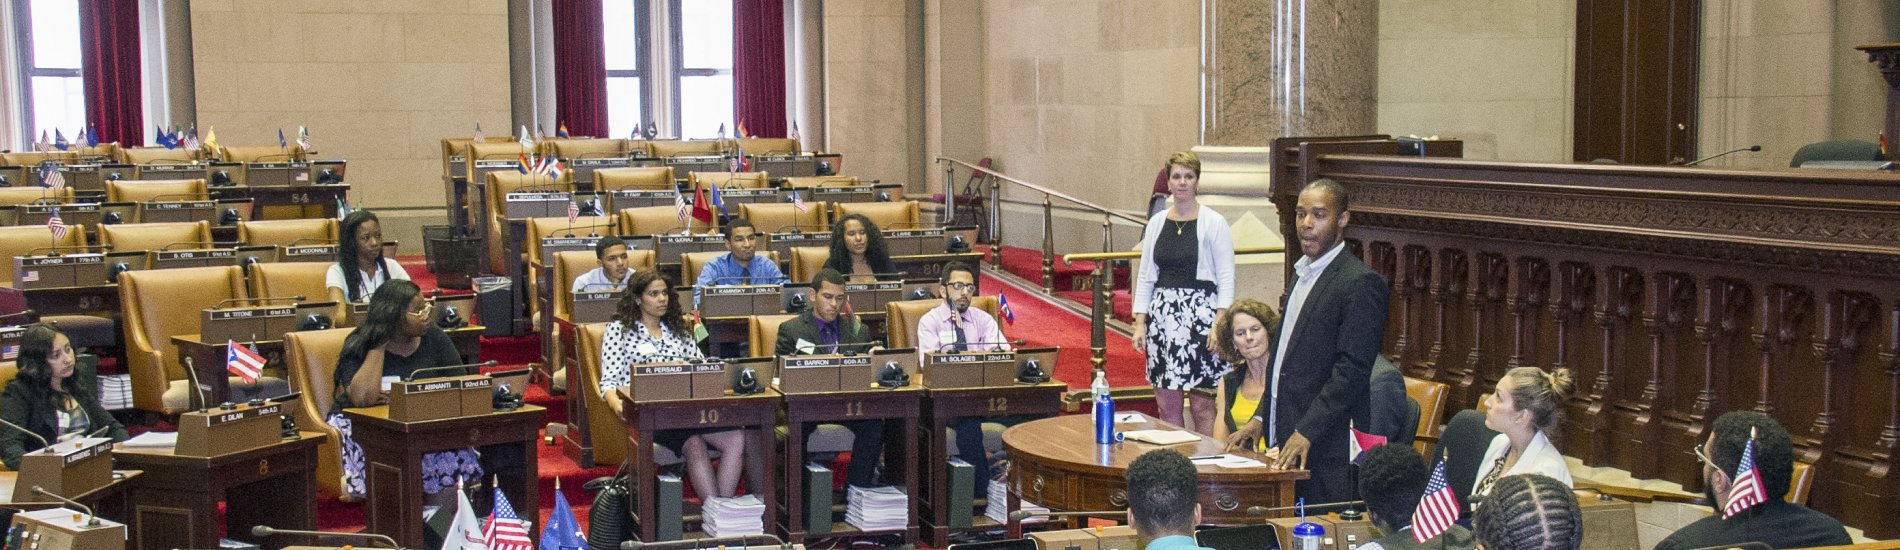 A group of students participating in a mock legislative session inside the New York State Capitol building.